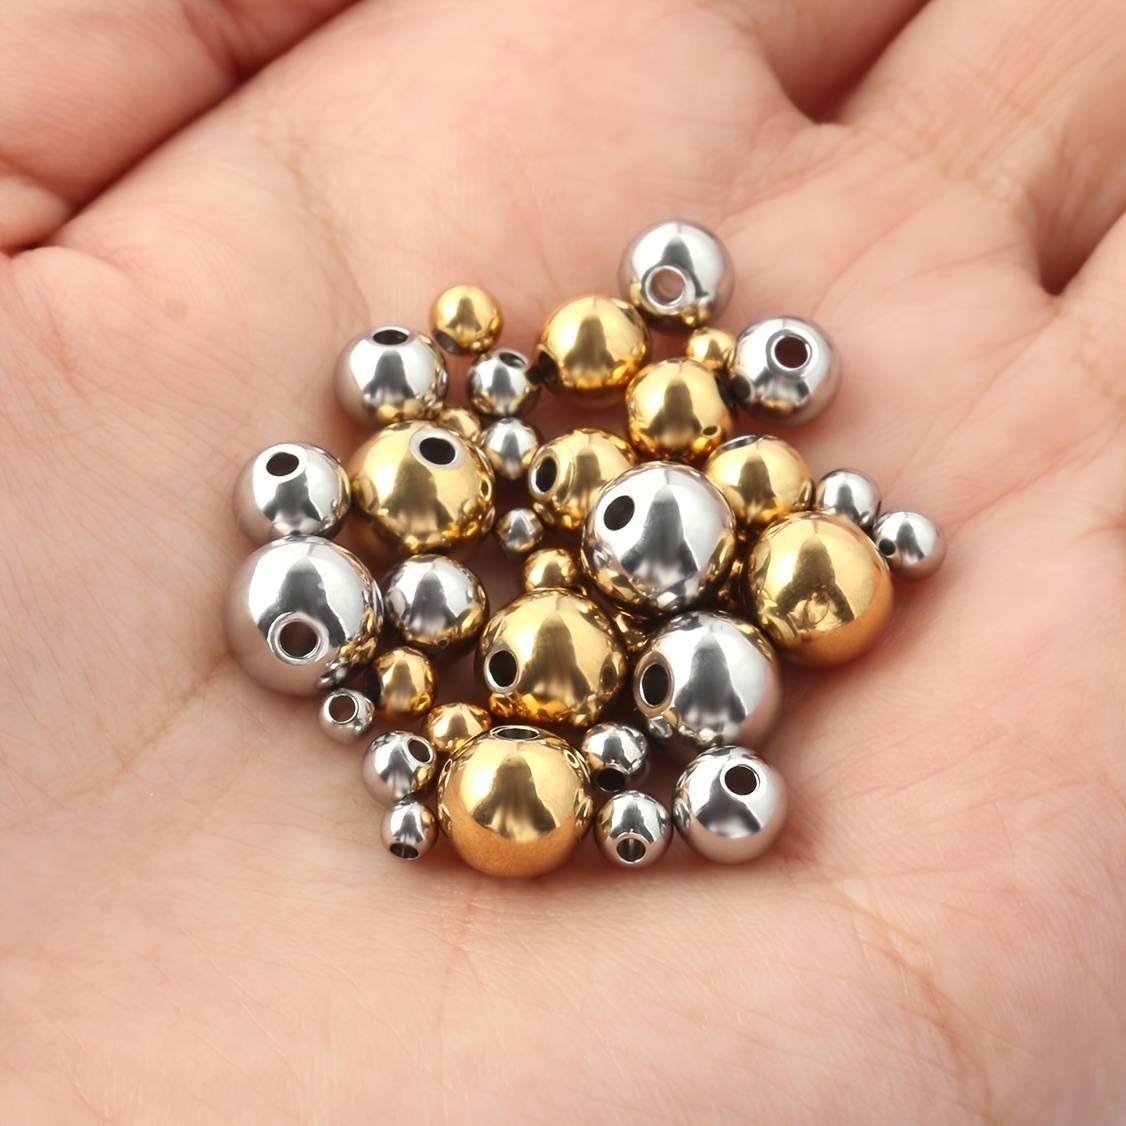 5/6/8mm Stainless Steel Spacer Beads Round Loose Spacers Bracelet